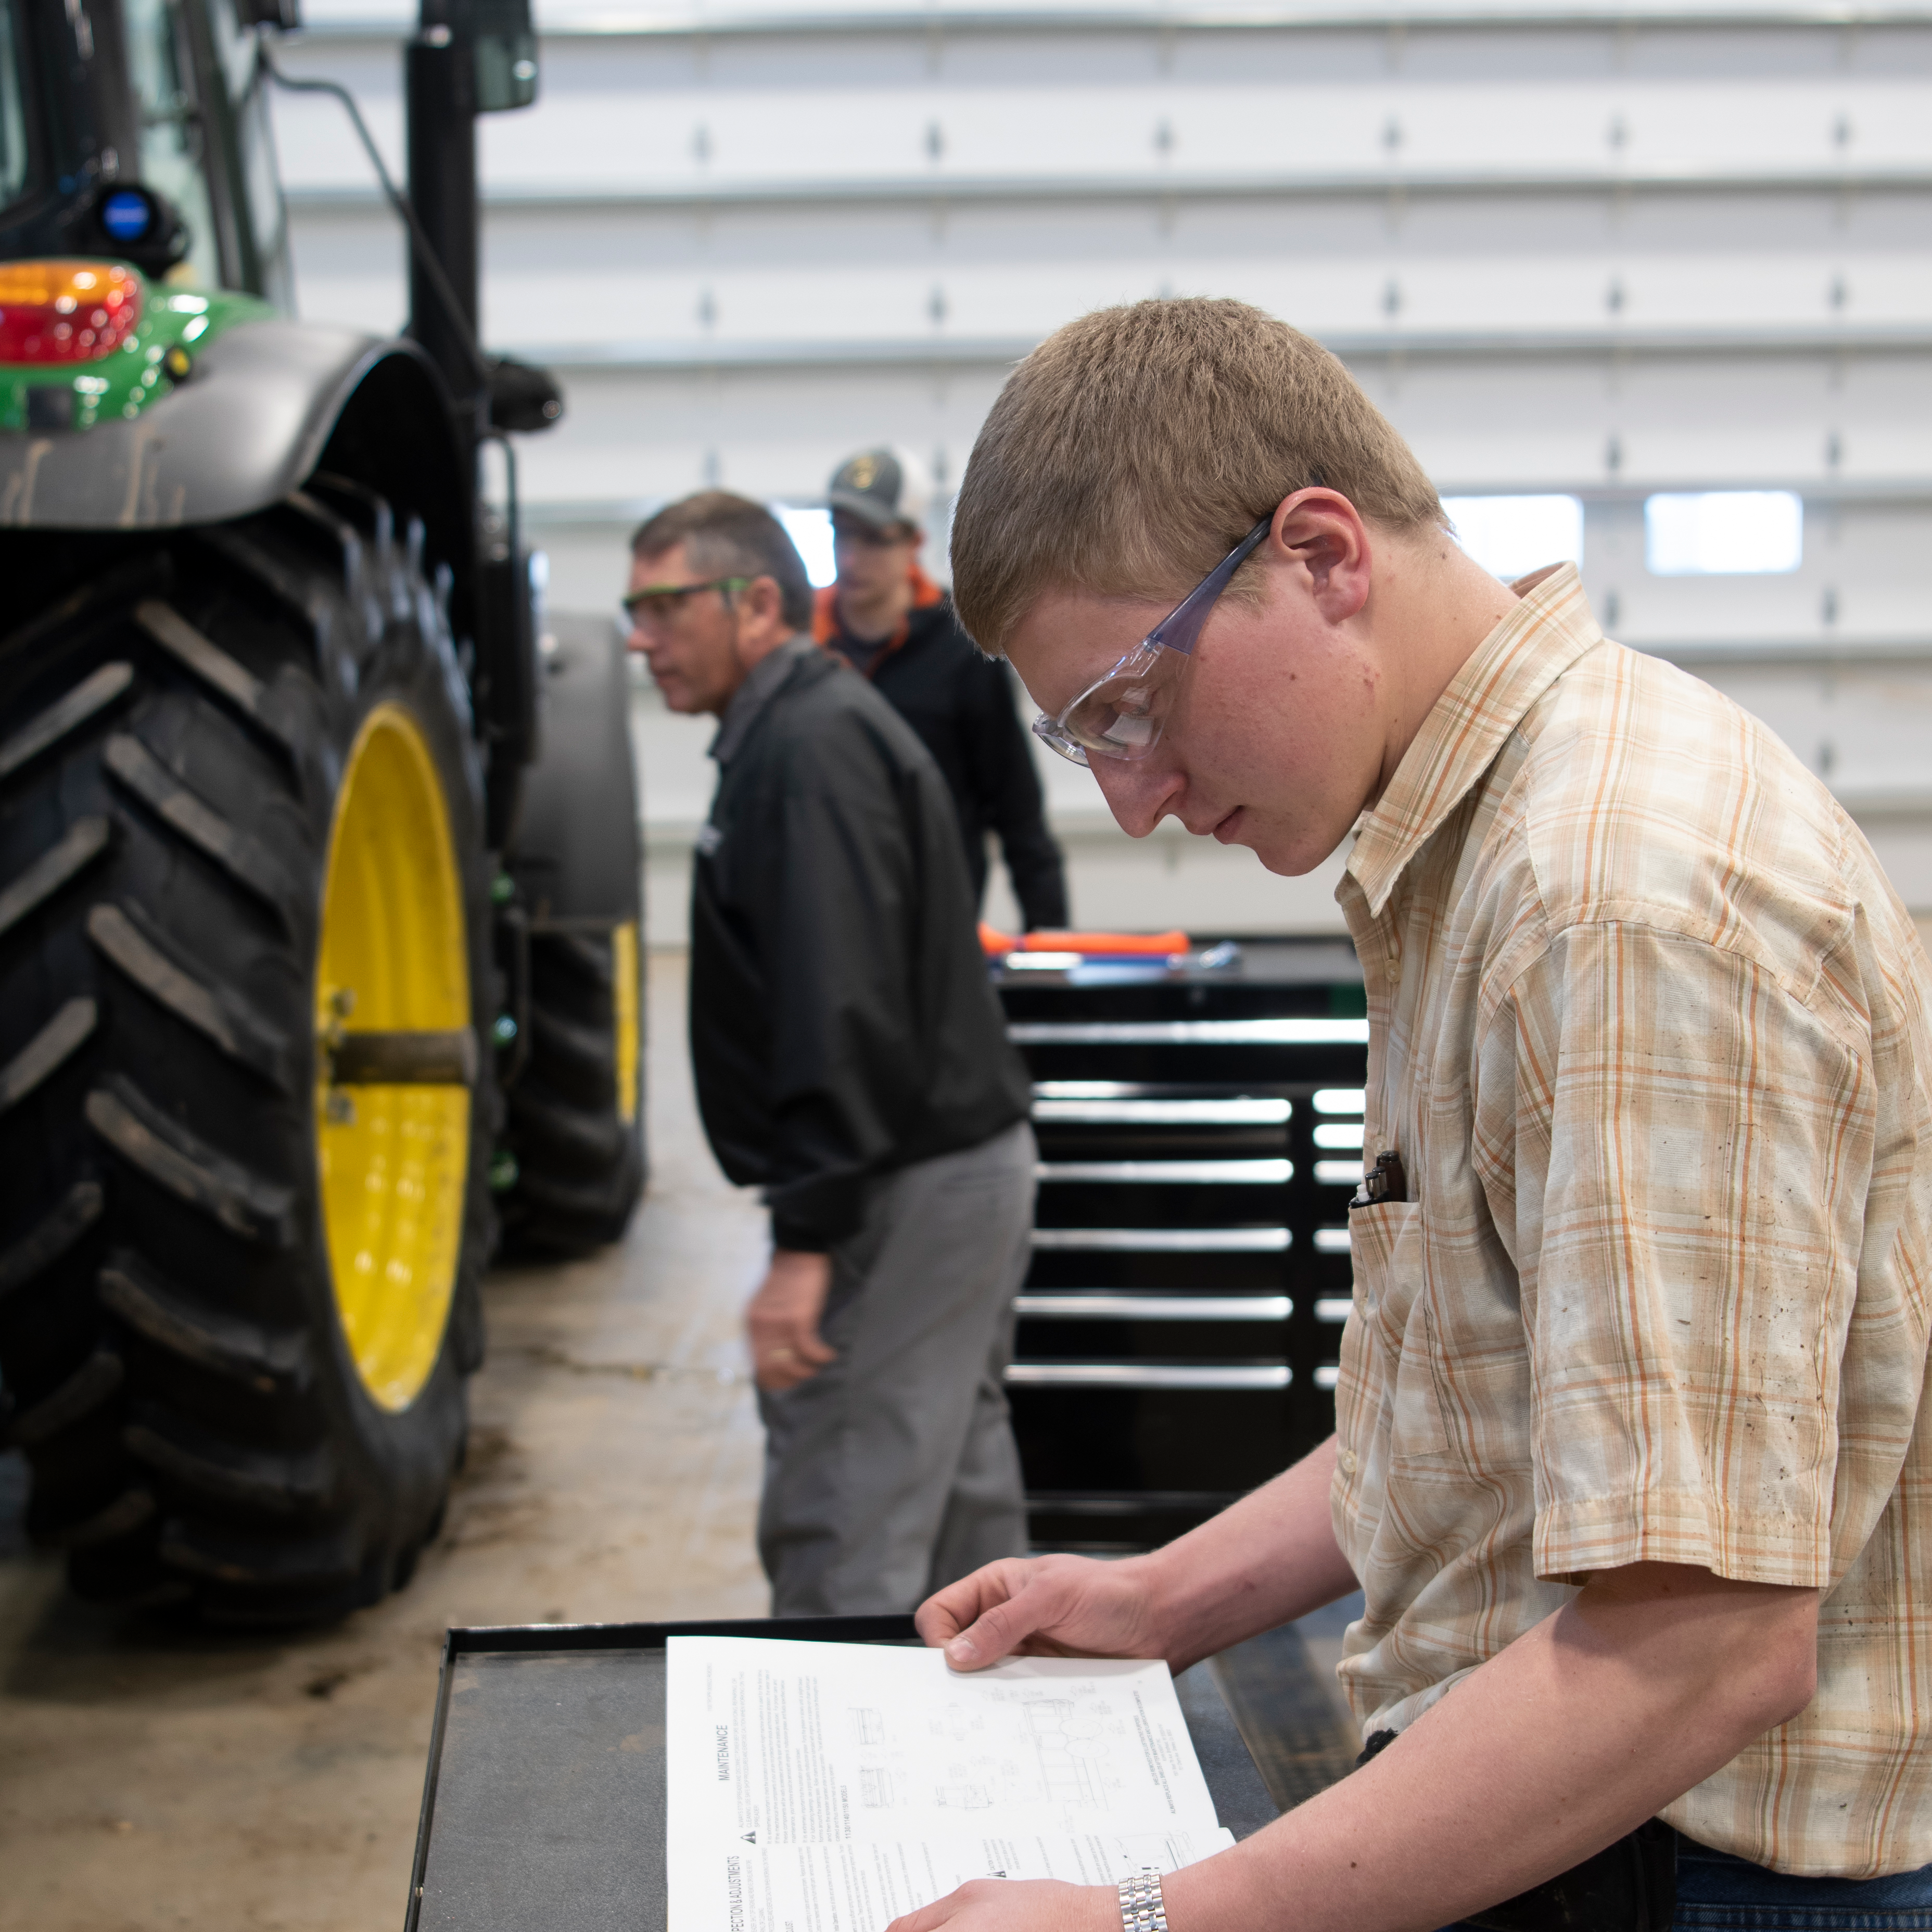 A male student reviews a maintenance manual in the high bay of the Agriculture Stewardship Center